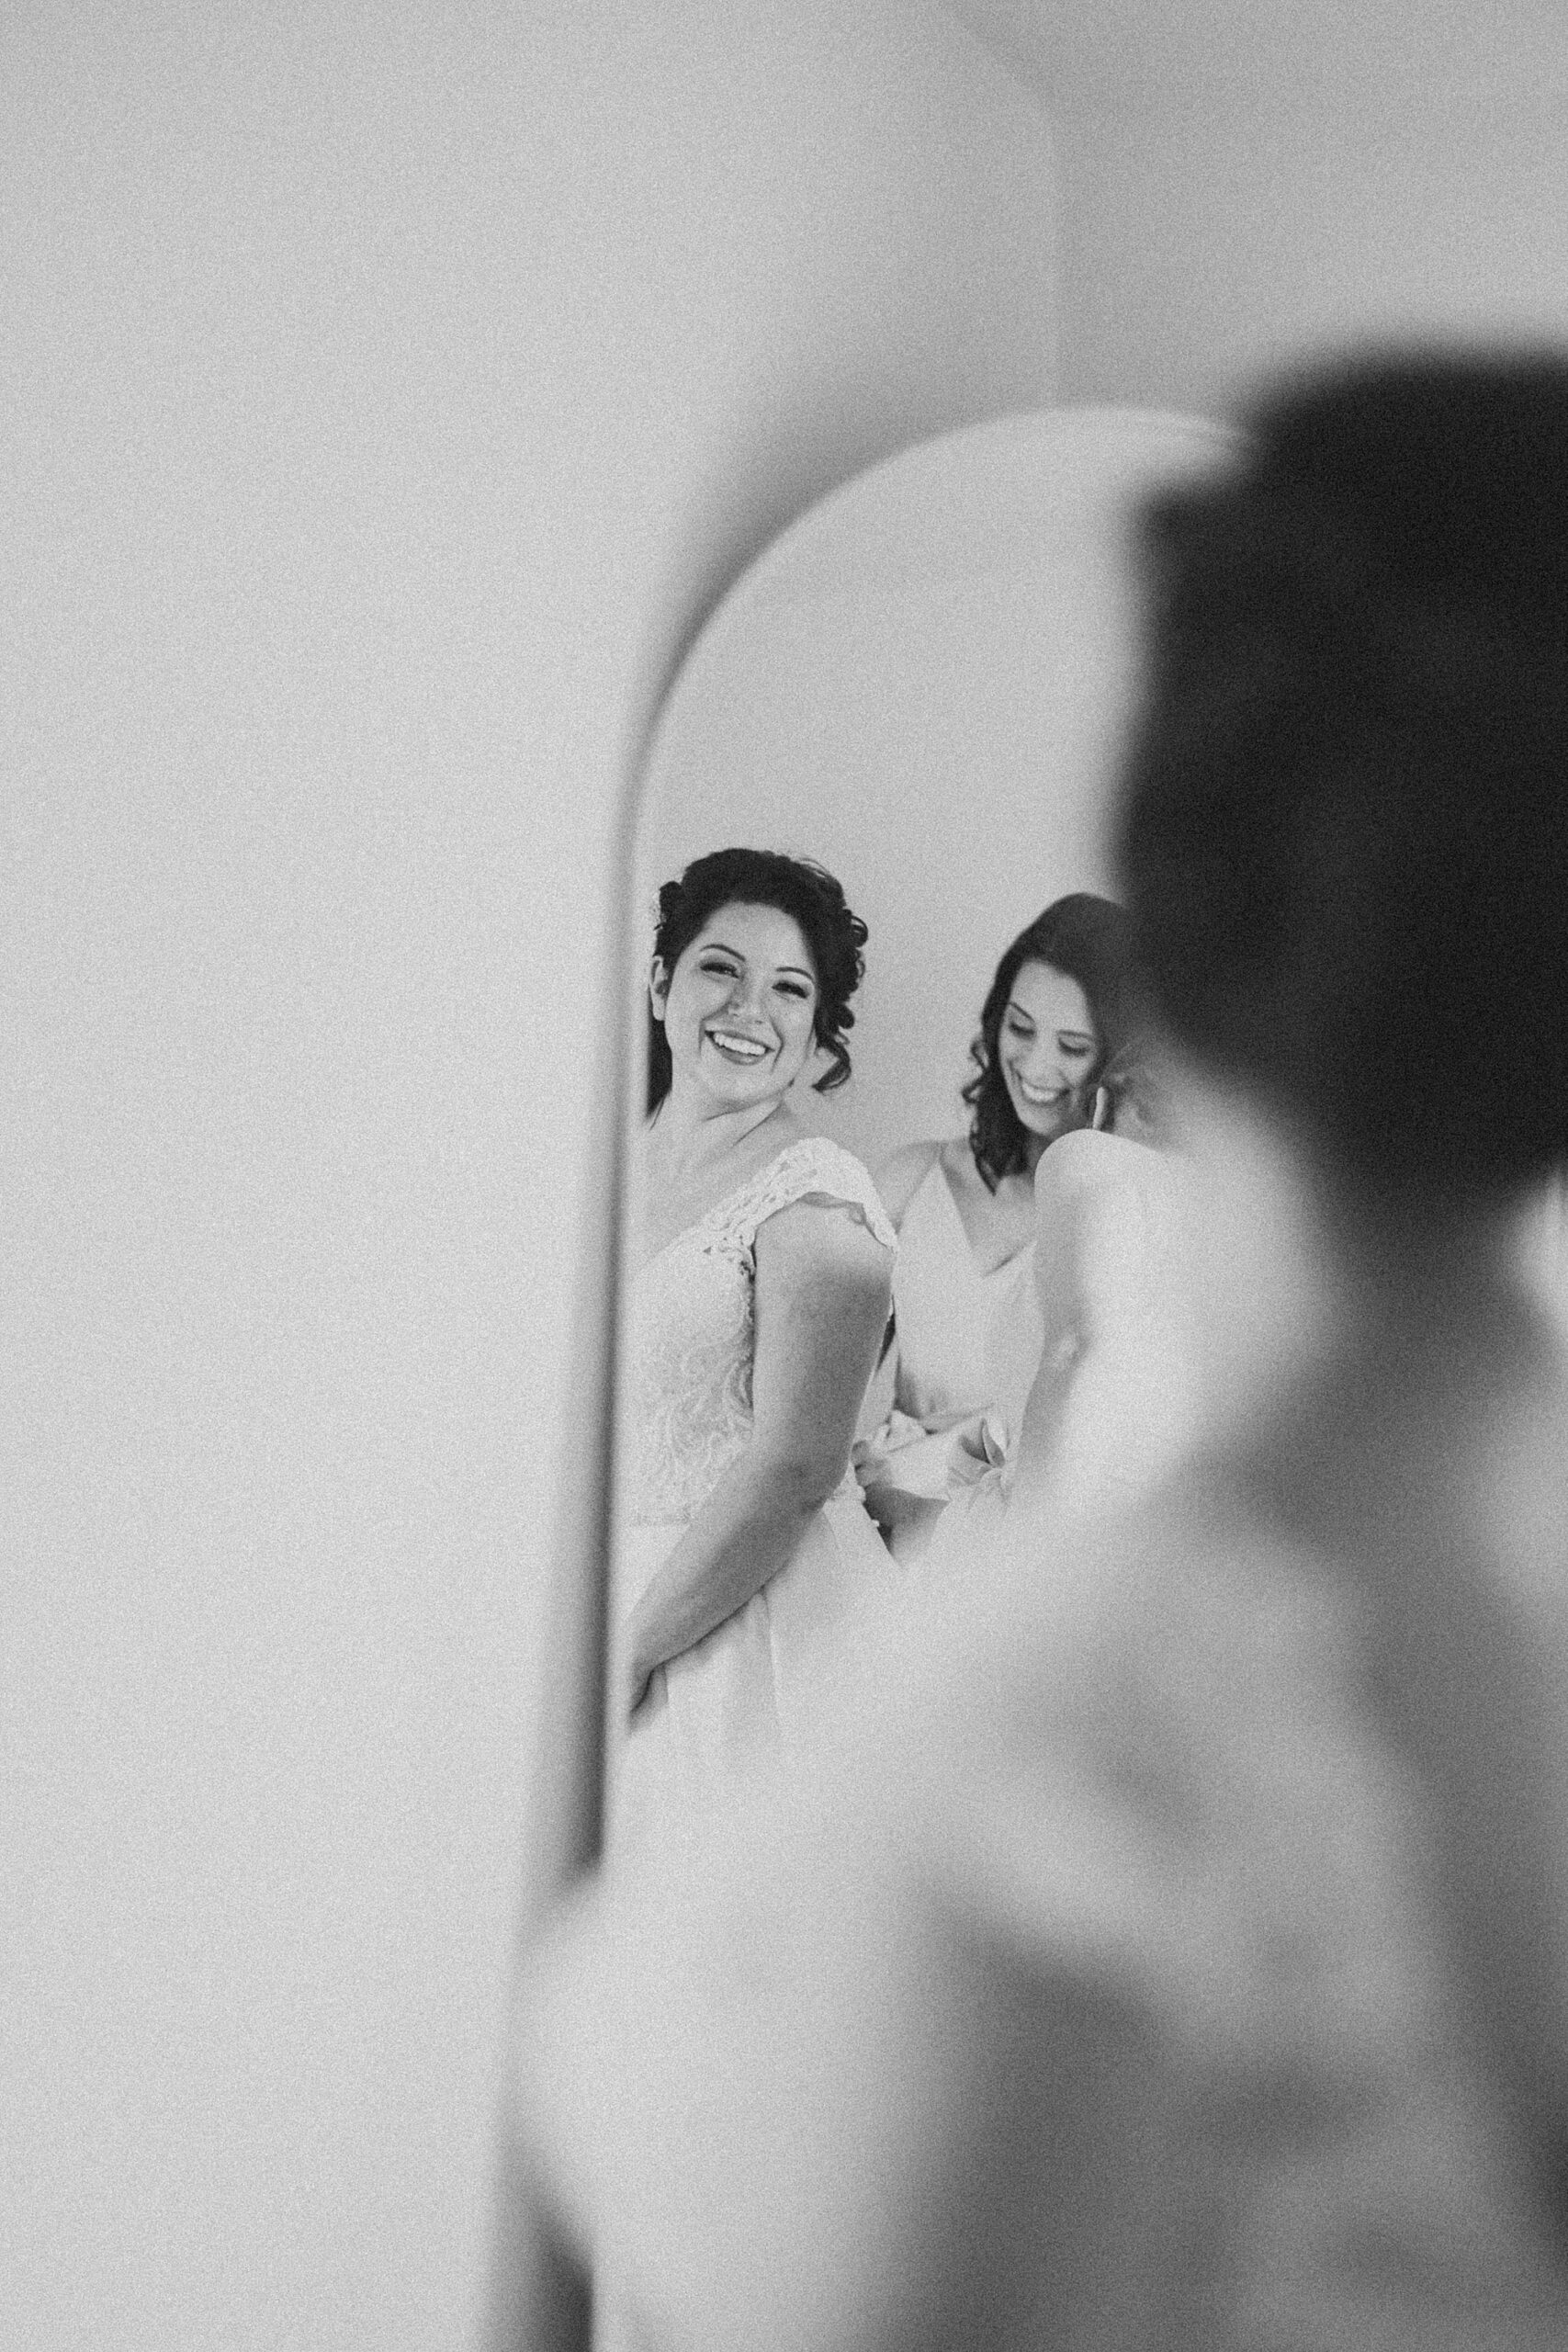 woman helps bride into wedding dress looking in mirrored reflection 